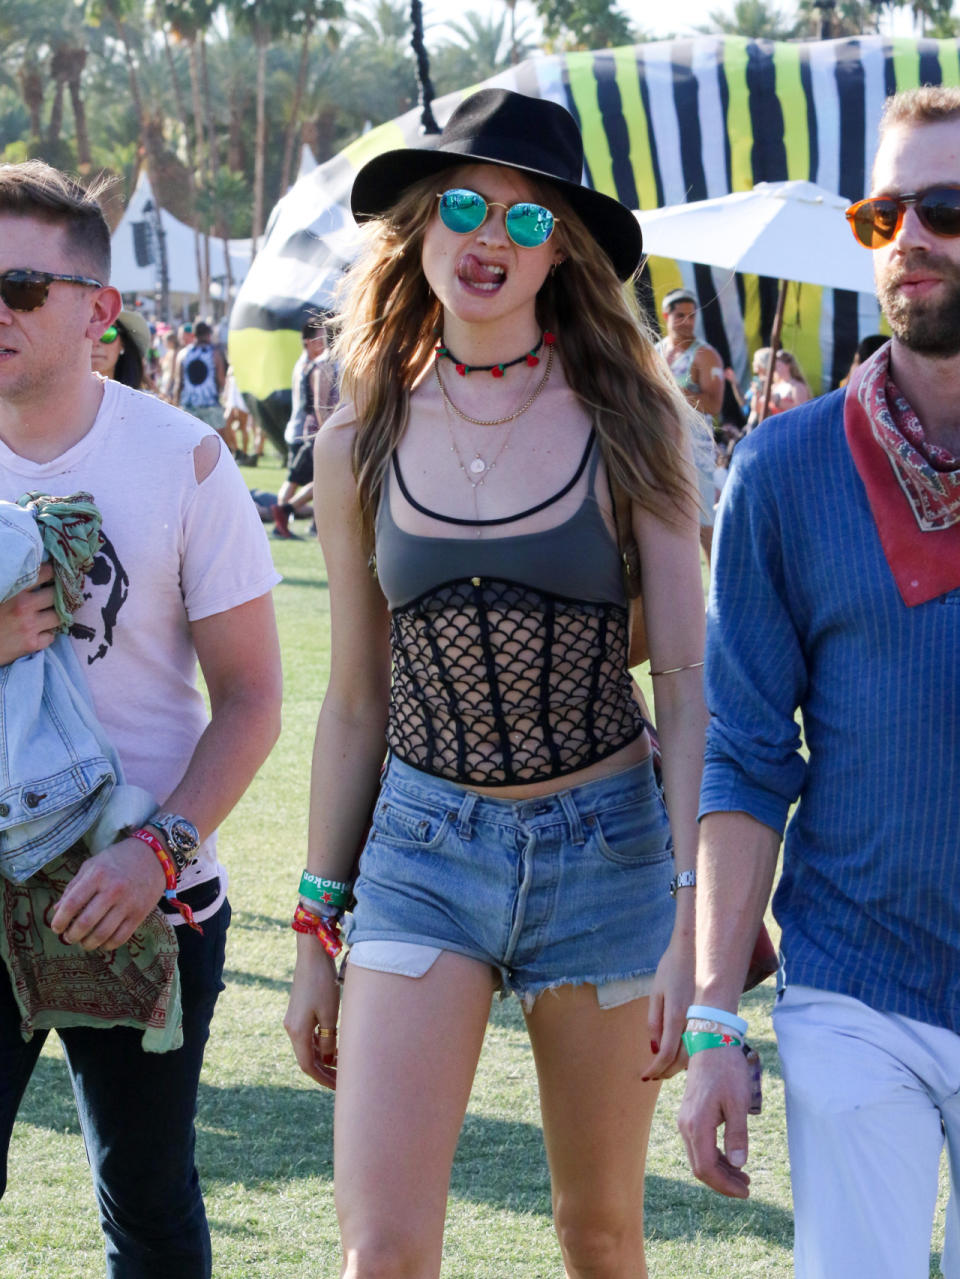 The wide-brimmed hat, round sunnies, jean shorts, and layered neclaces are all Coachella staples, but Behati Prinsloo also brought some Victoria’s Secret to the festival with her with a sheer cage tank.